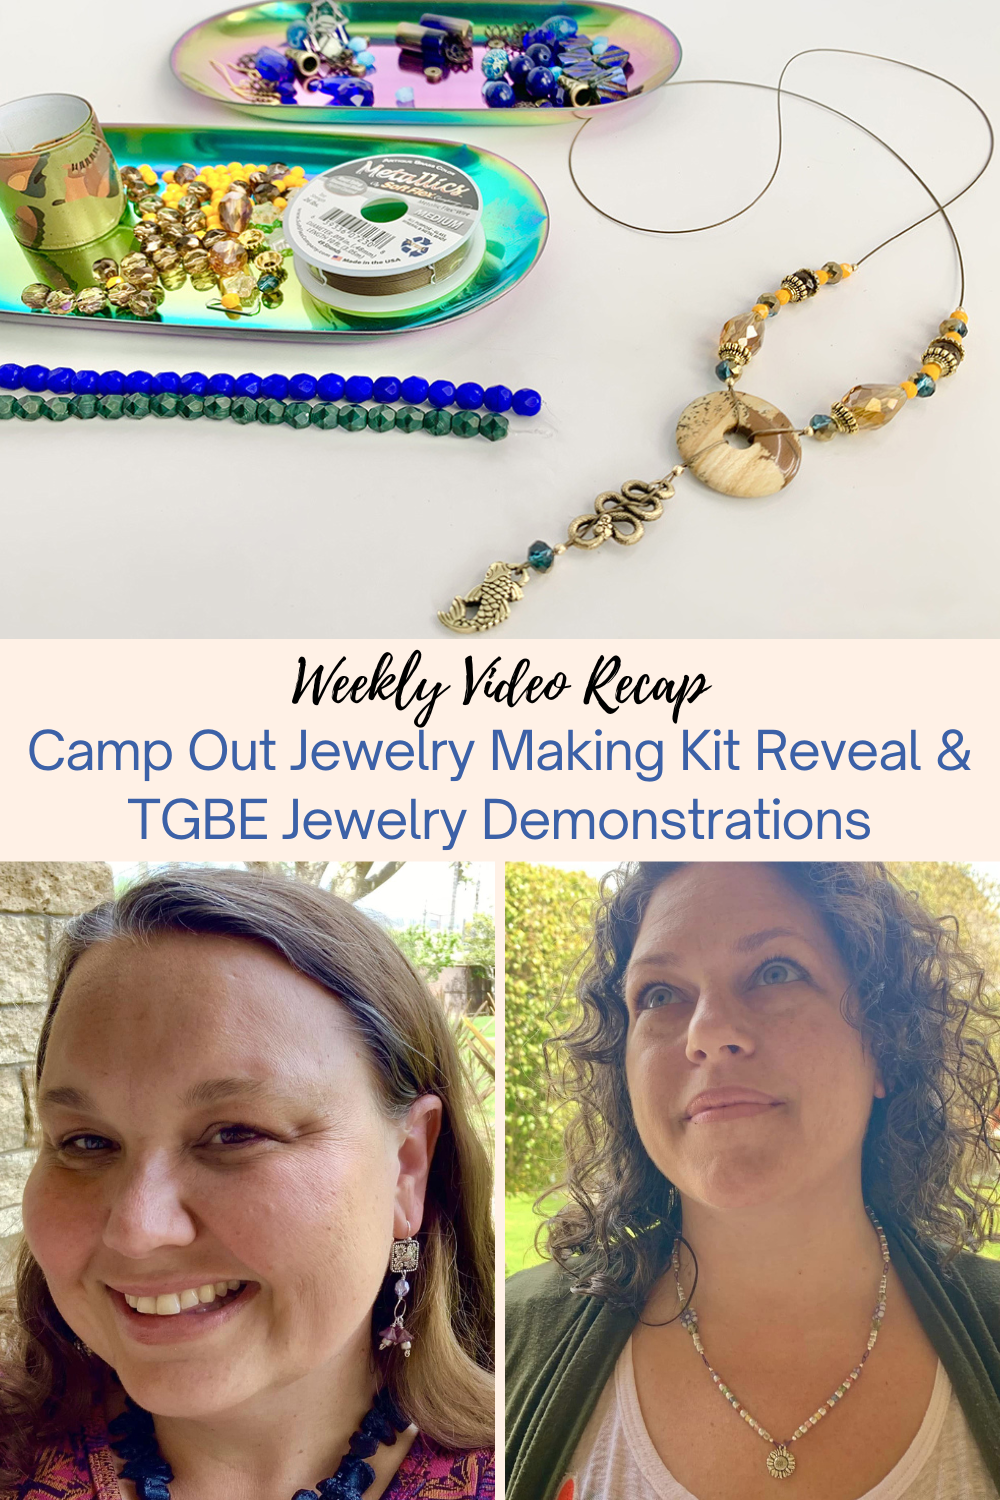 Camp Out Jewelry Making Kit Reveal & TGBE Jewelry Demonstrations Collage